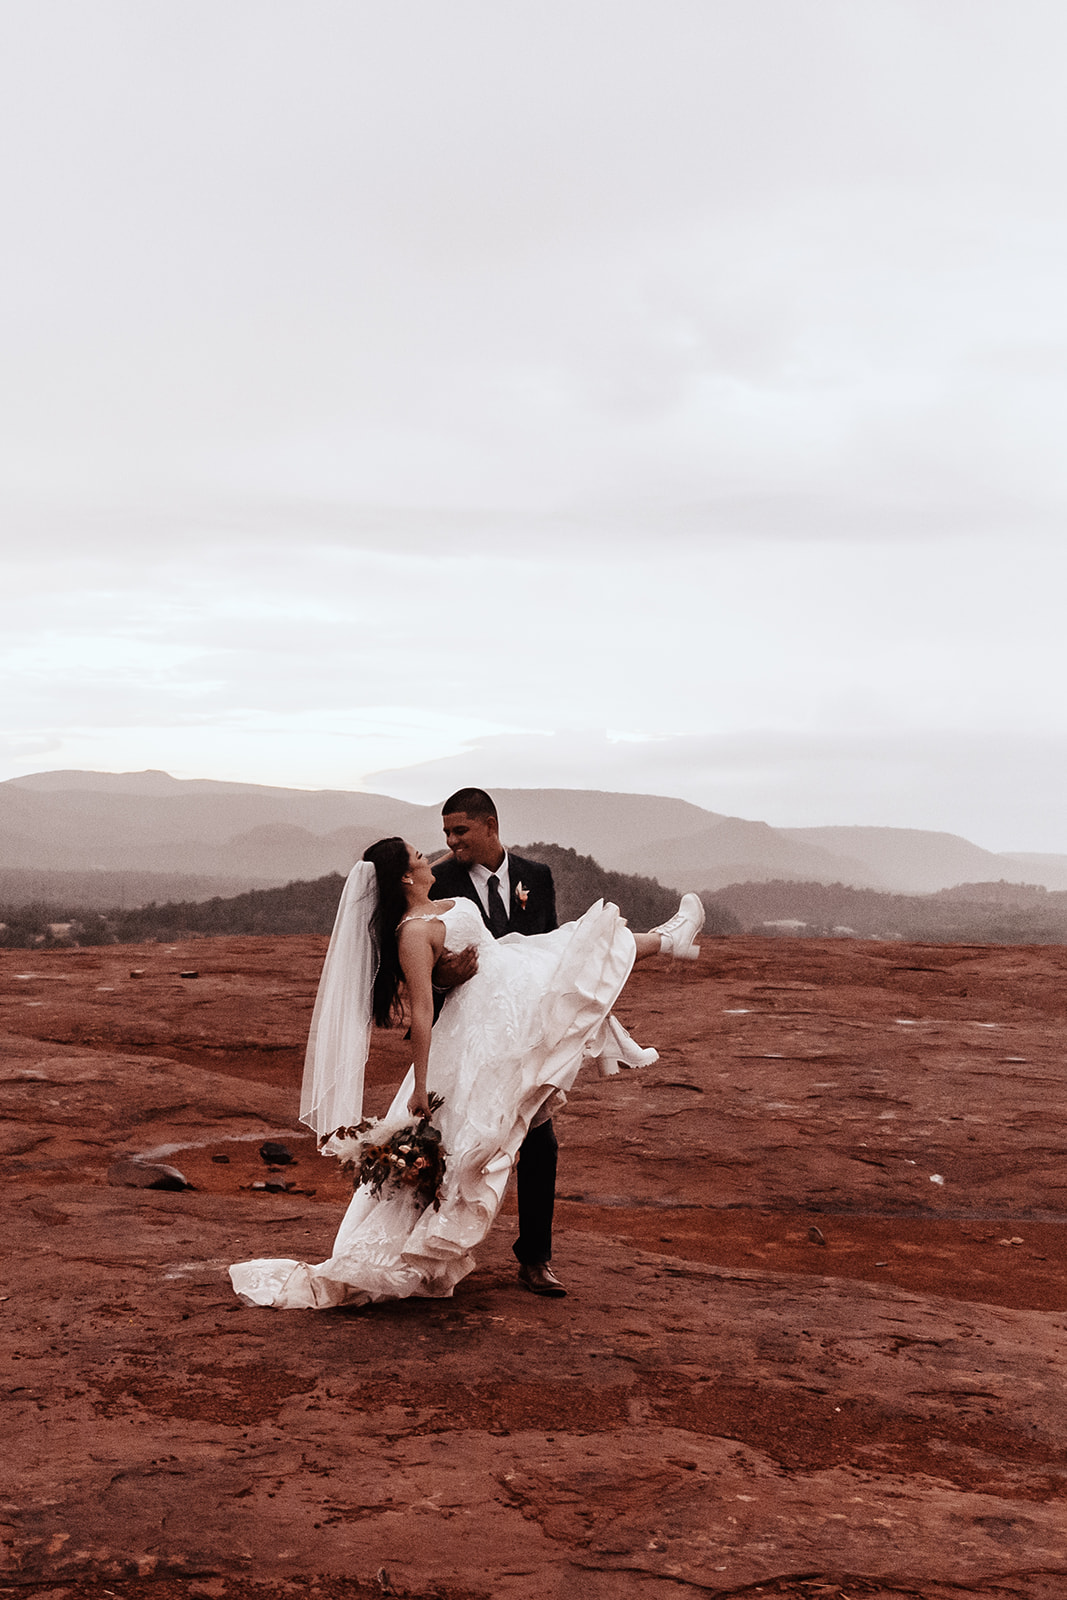 A couple who eloped in sedona dance in the rain